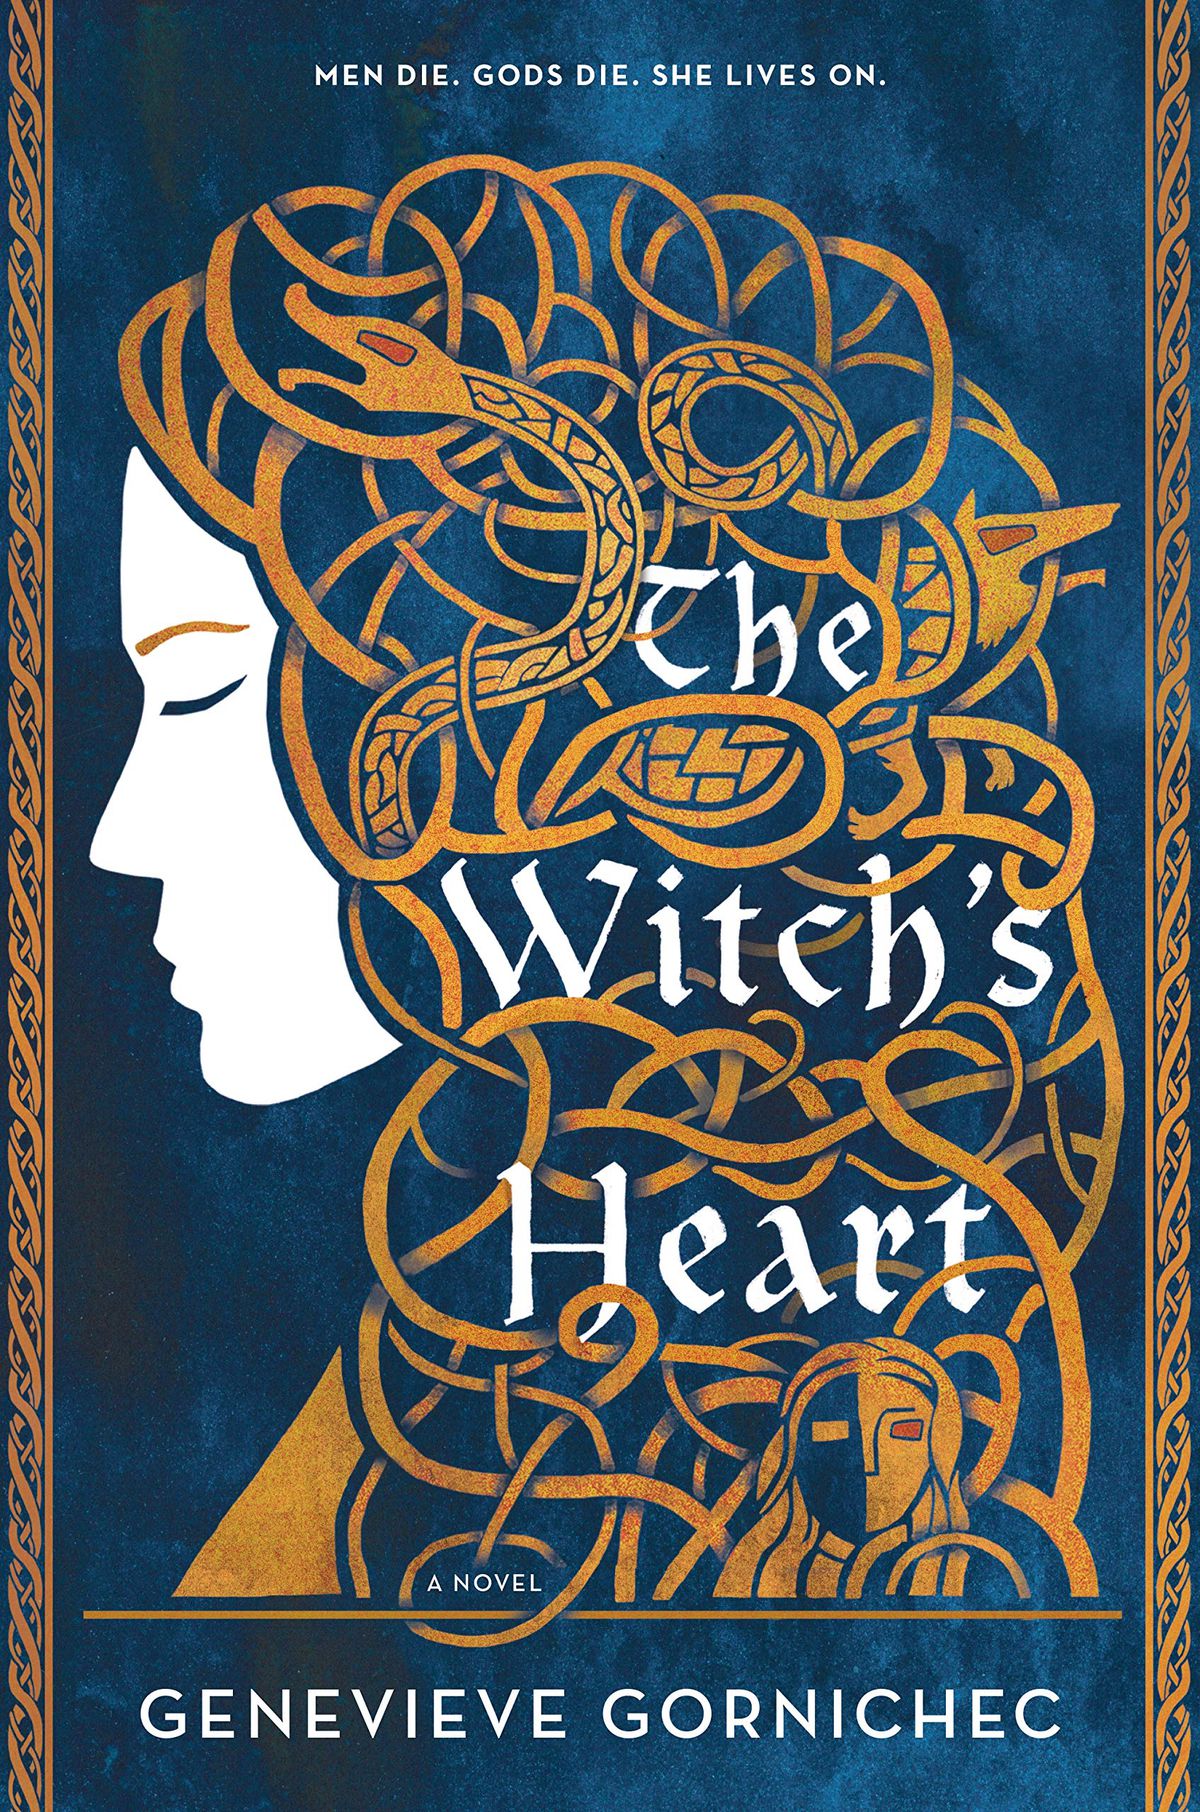 The cover for “The Witch’s Heart” by Genevieve Gornichec which shows a woman with Medusa-like hair, and the book’s title woven in